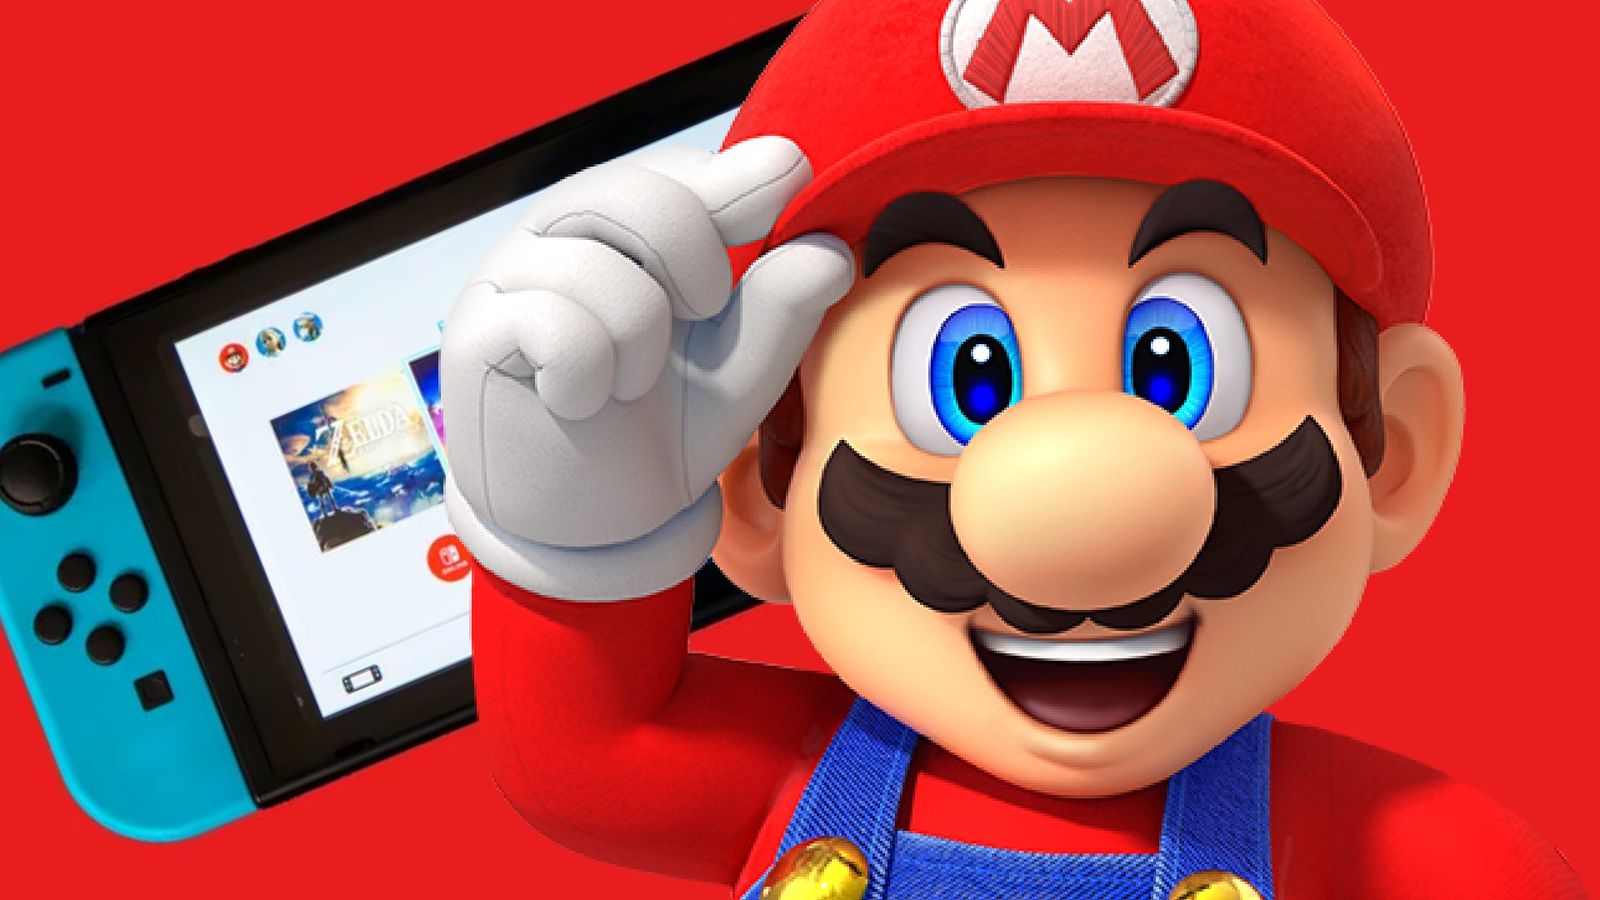 Nintendo Switch 2 RAM size - Mario tipping his big red hat